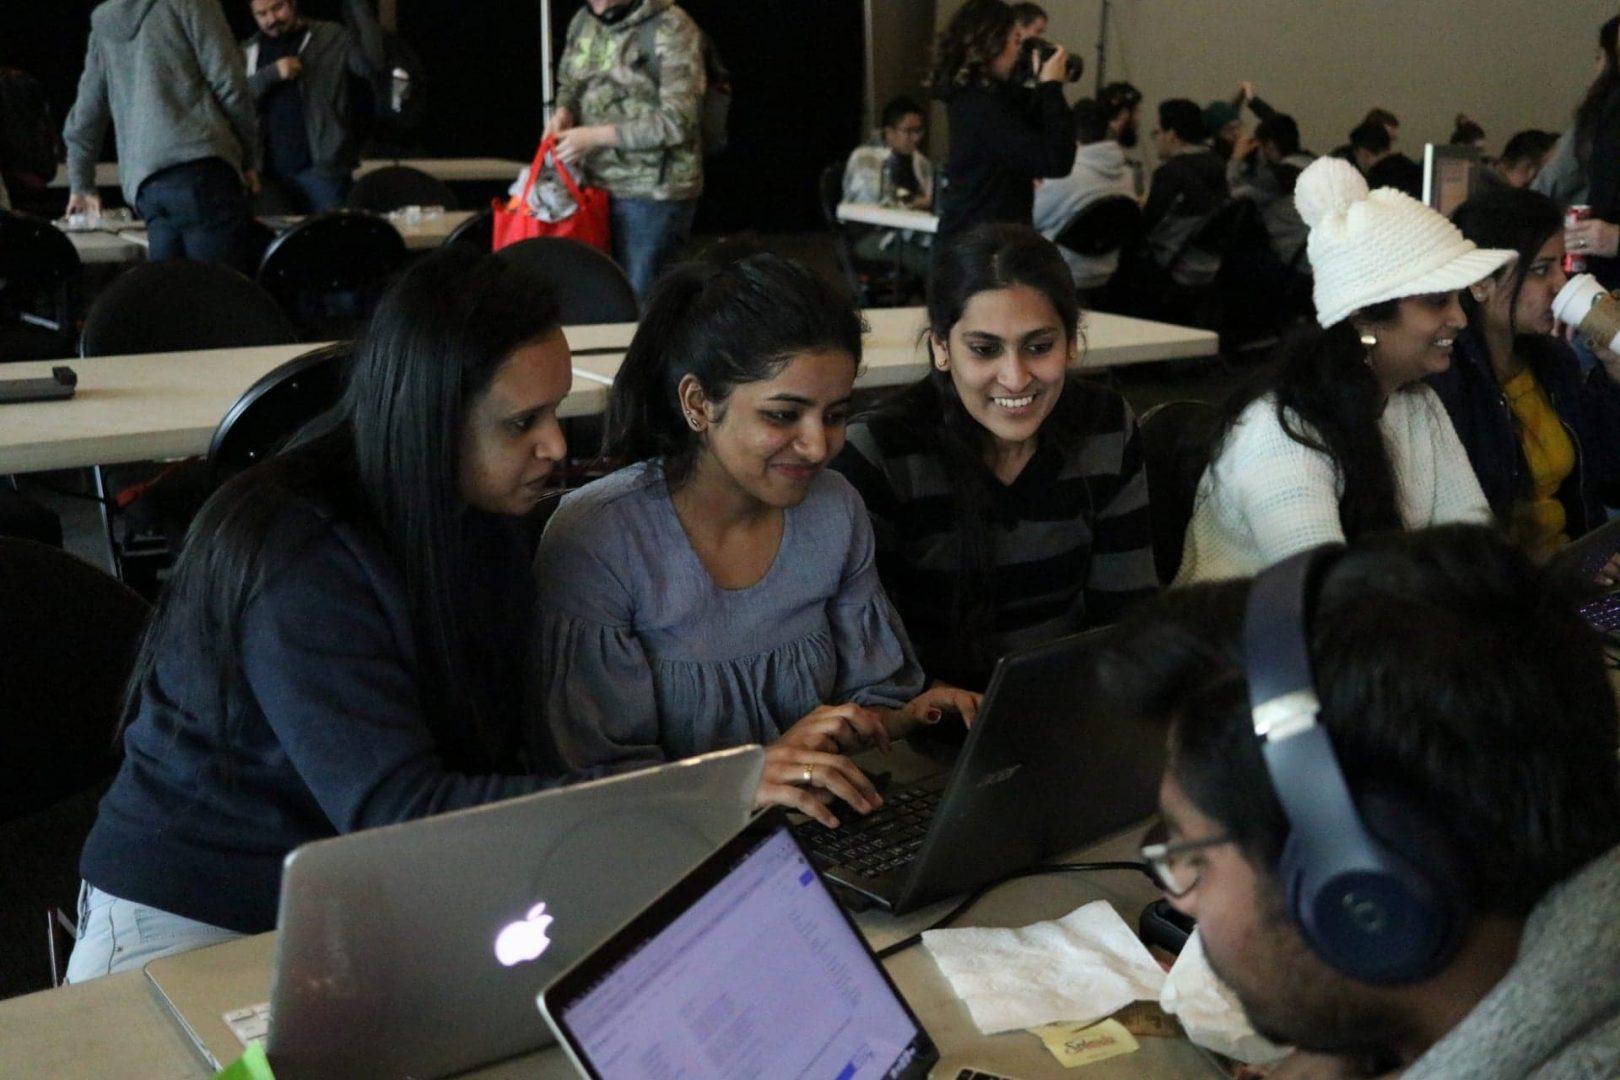 Students participate in HackFresnos 2019 hackathon at Fresno State on Saturday, Feb. 23, 2019. (Larry Valenzuela/The Collegian)